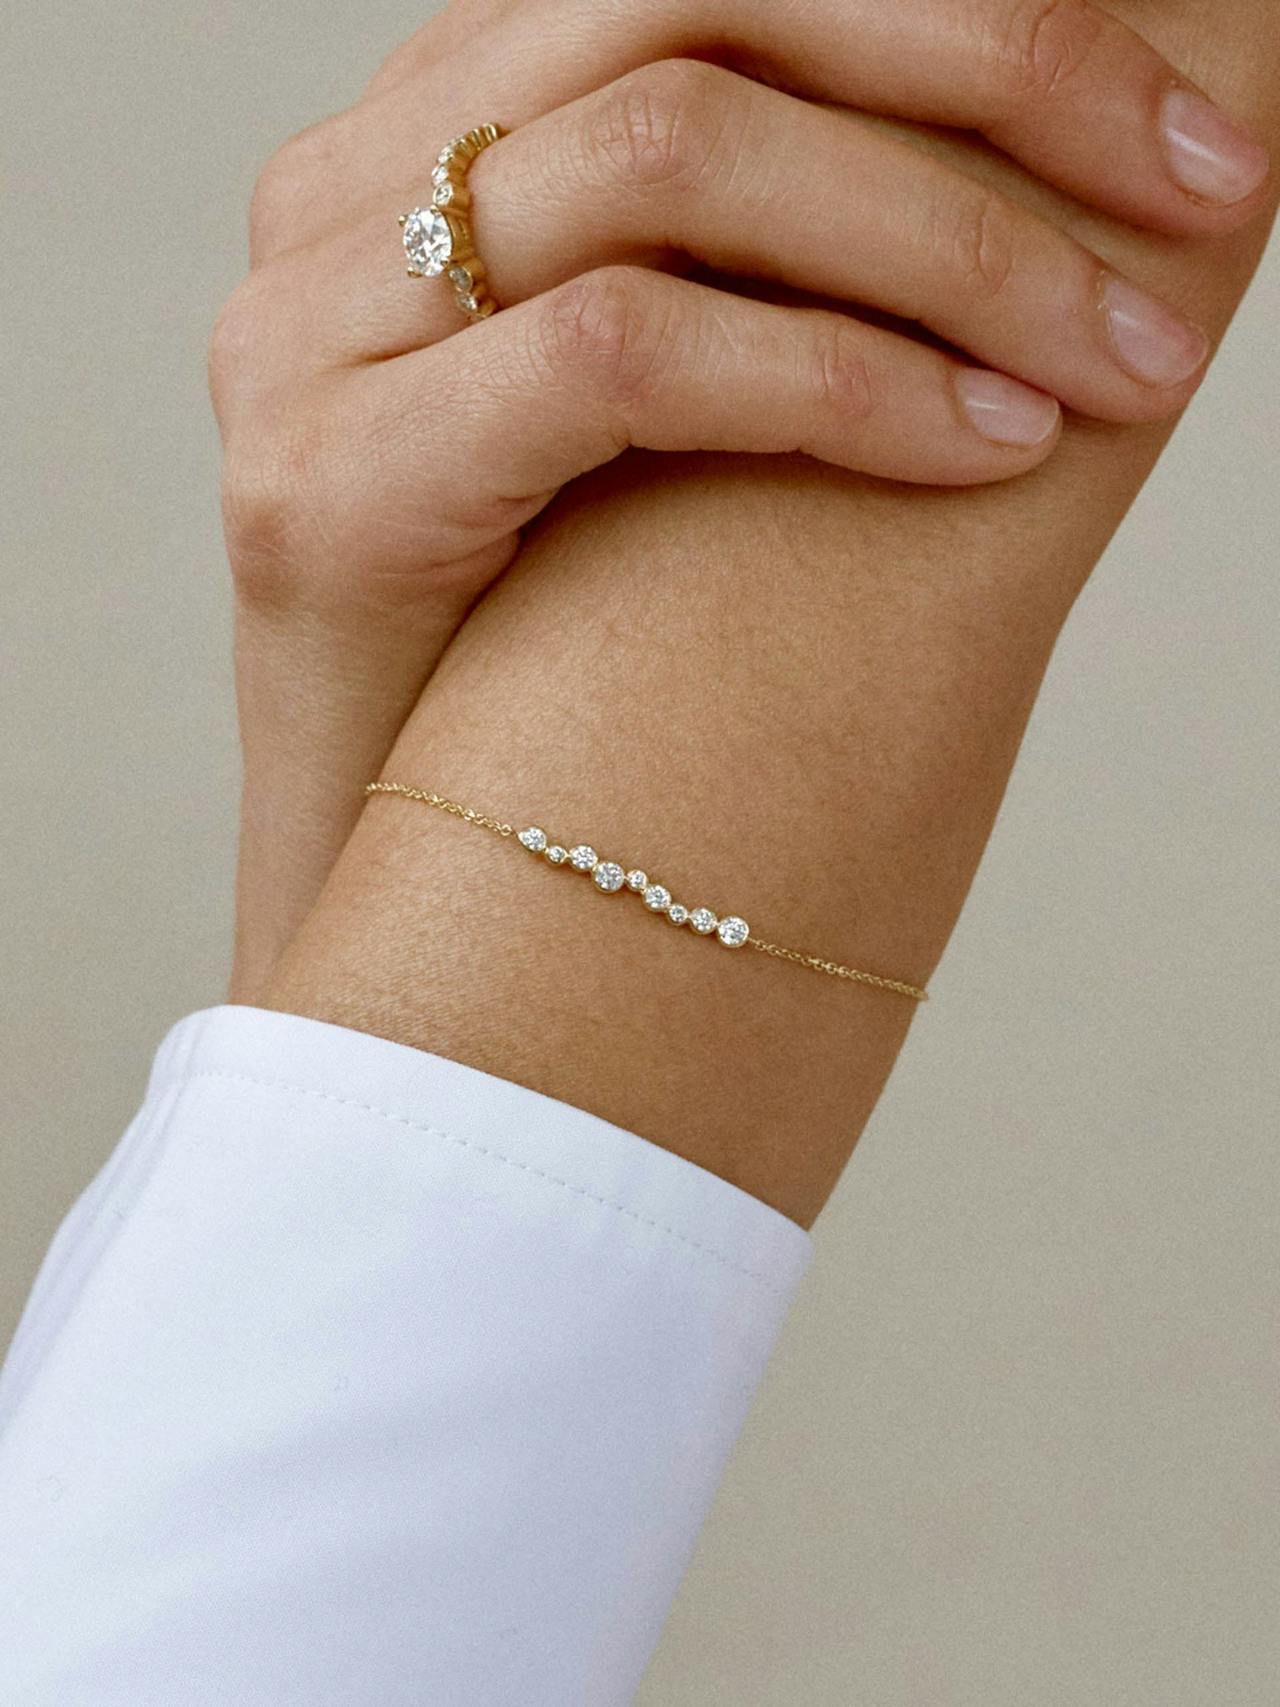 The chain cord made from 18k recycled solid gold, meets 9 circular diamond drops, also encased in 18k recycled solid gold.